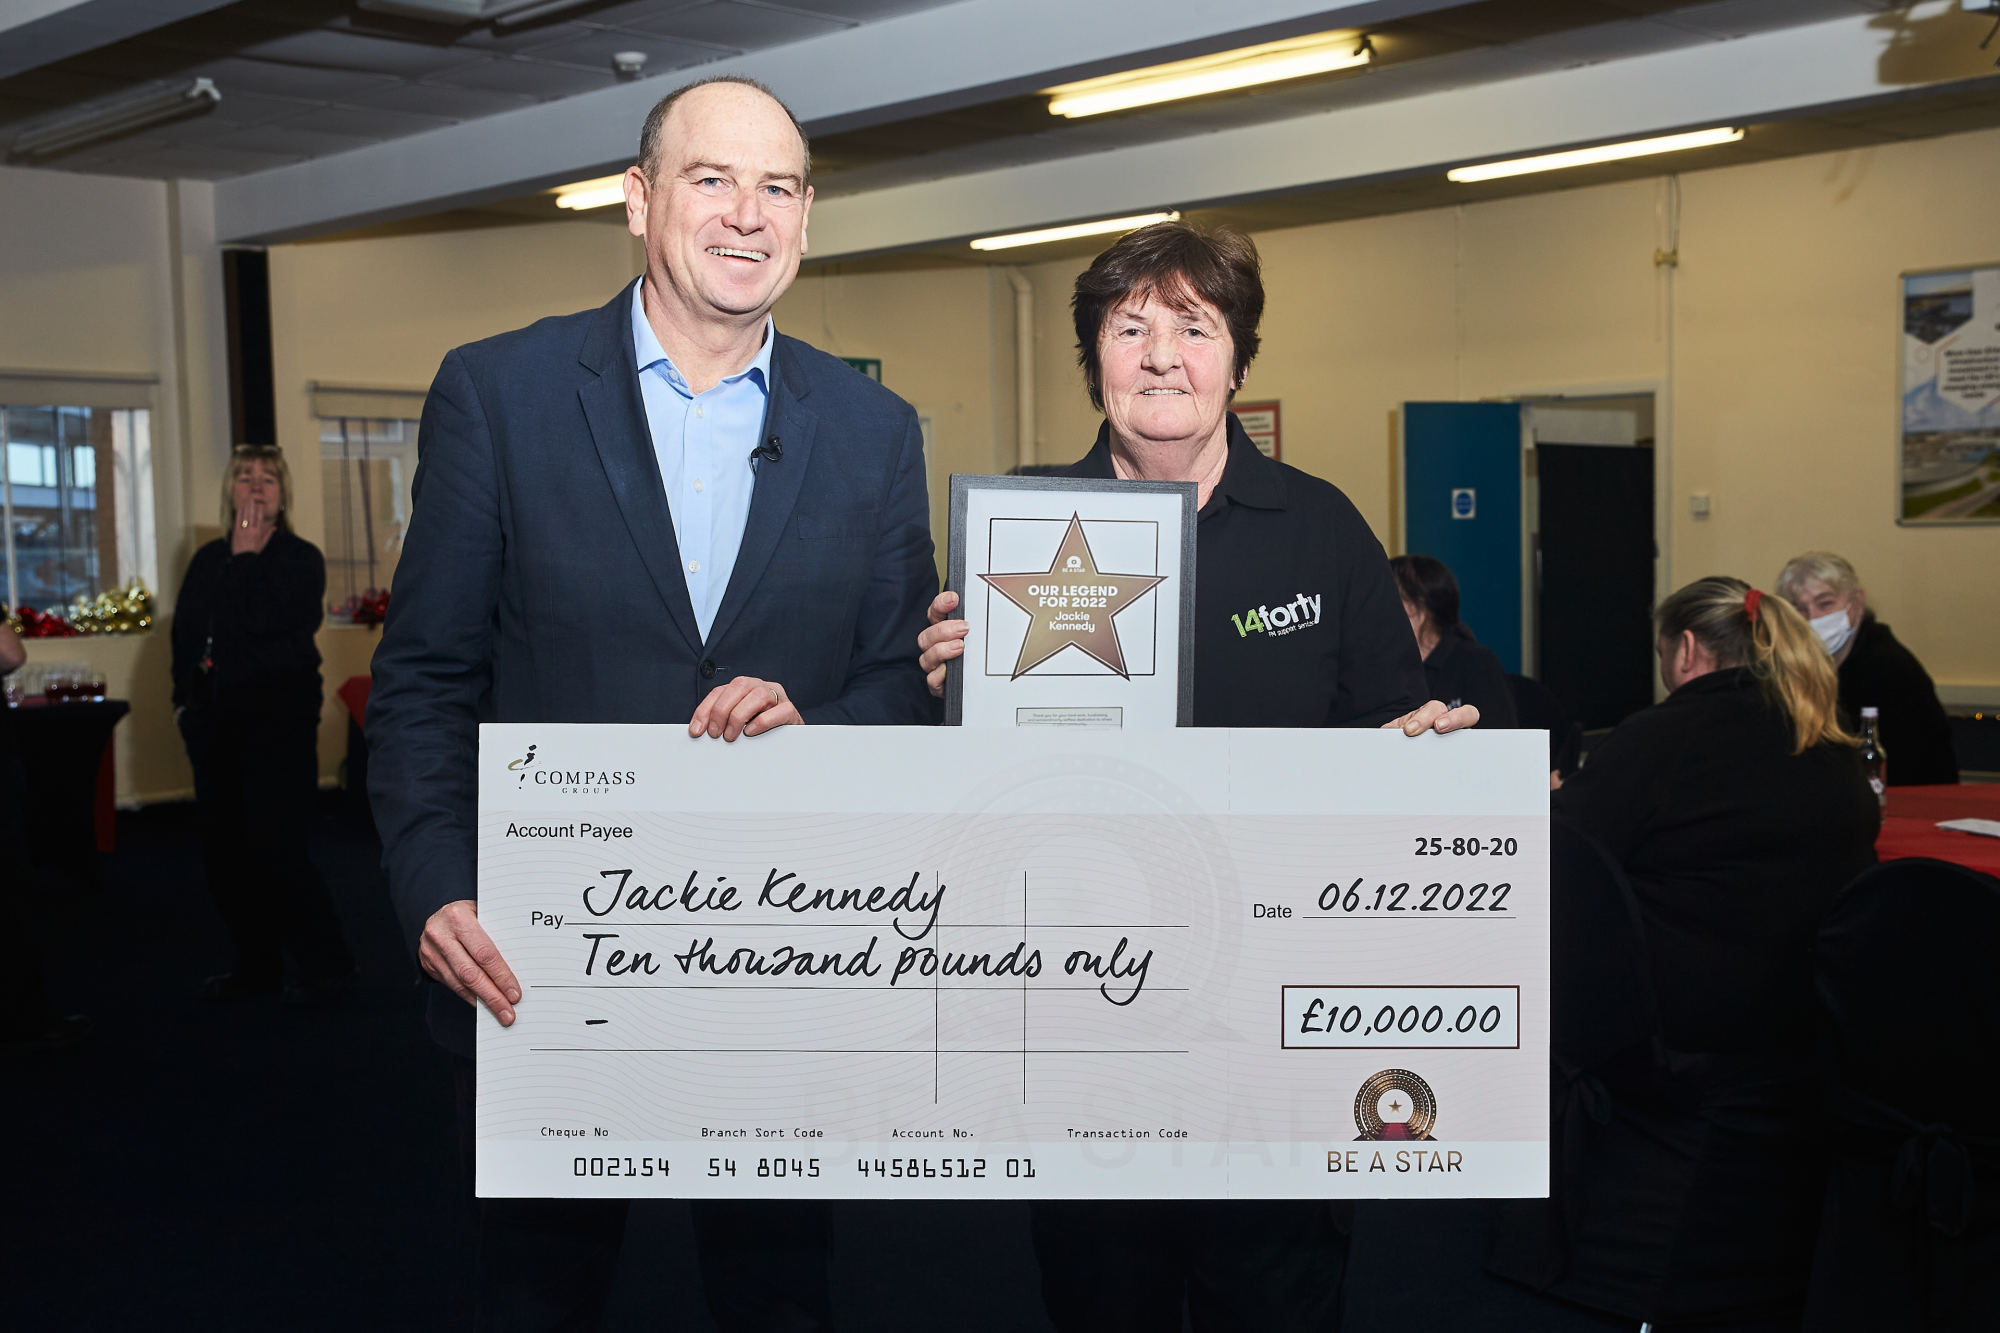 Compass Group Awards Cleaner £10,000 for “Be A Star” Award